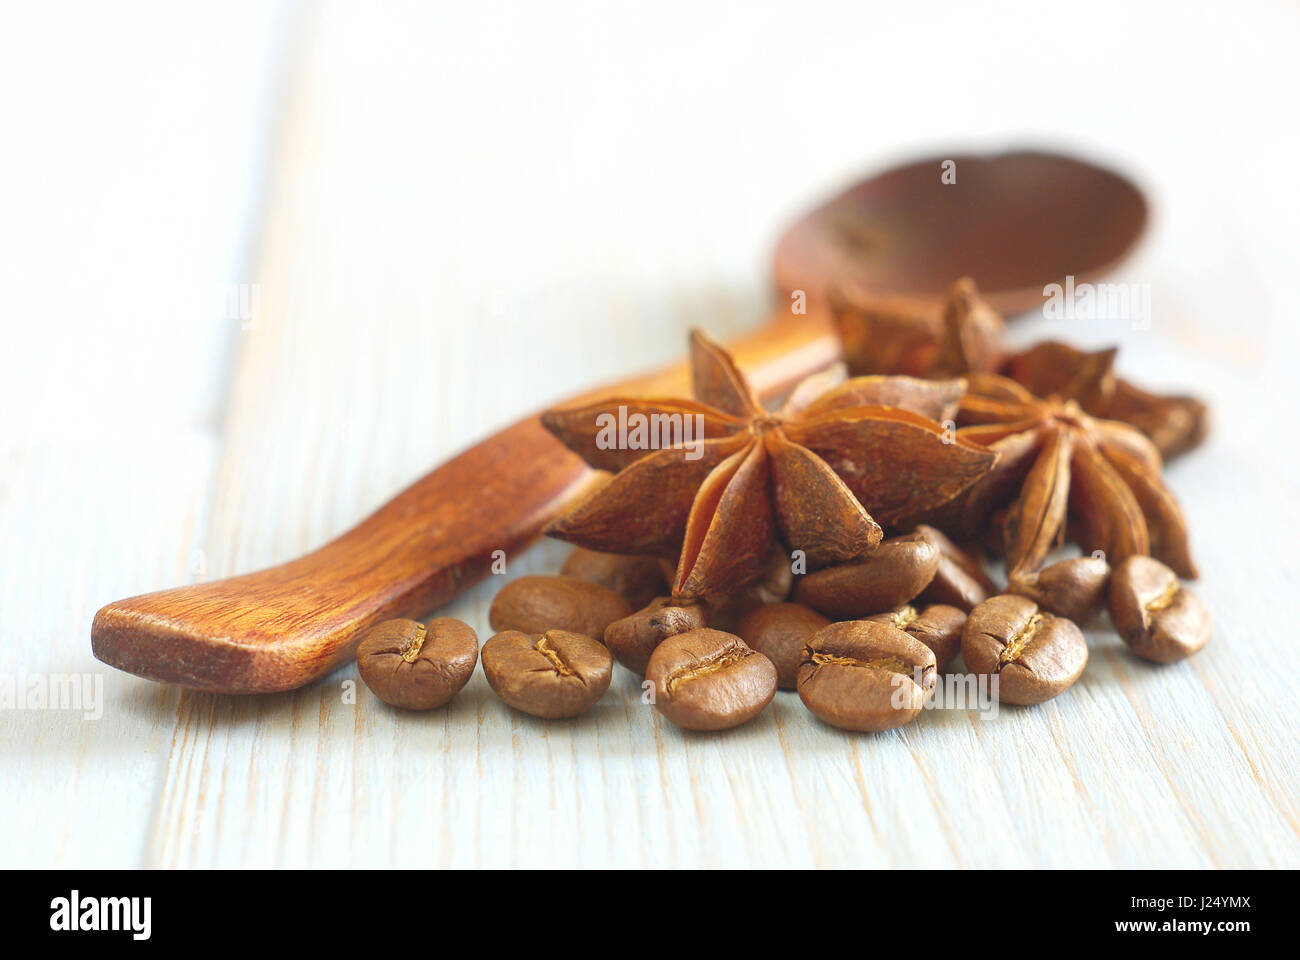 Coffee grains with anise star and wooden old-style spoon on vintage wooden table food ingredients background. Selective focus. Coffee drink aroma ingr Stock Photo